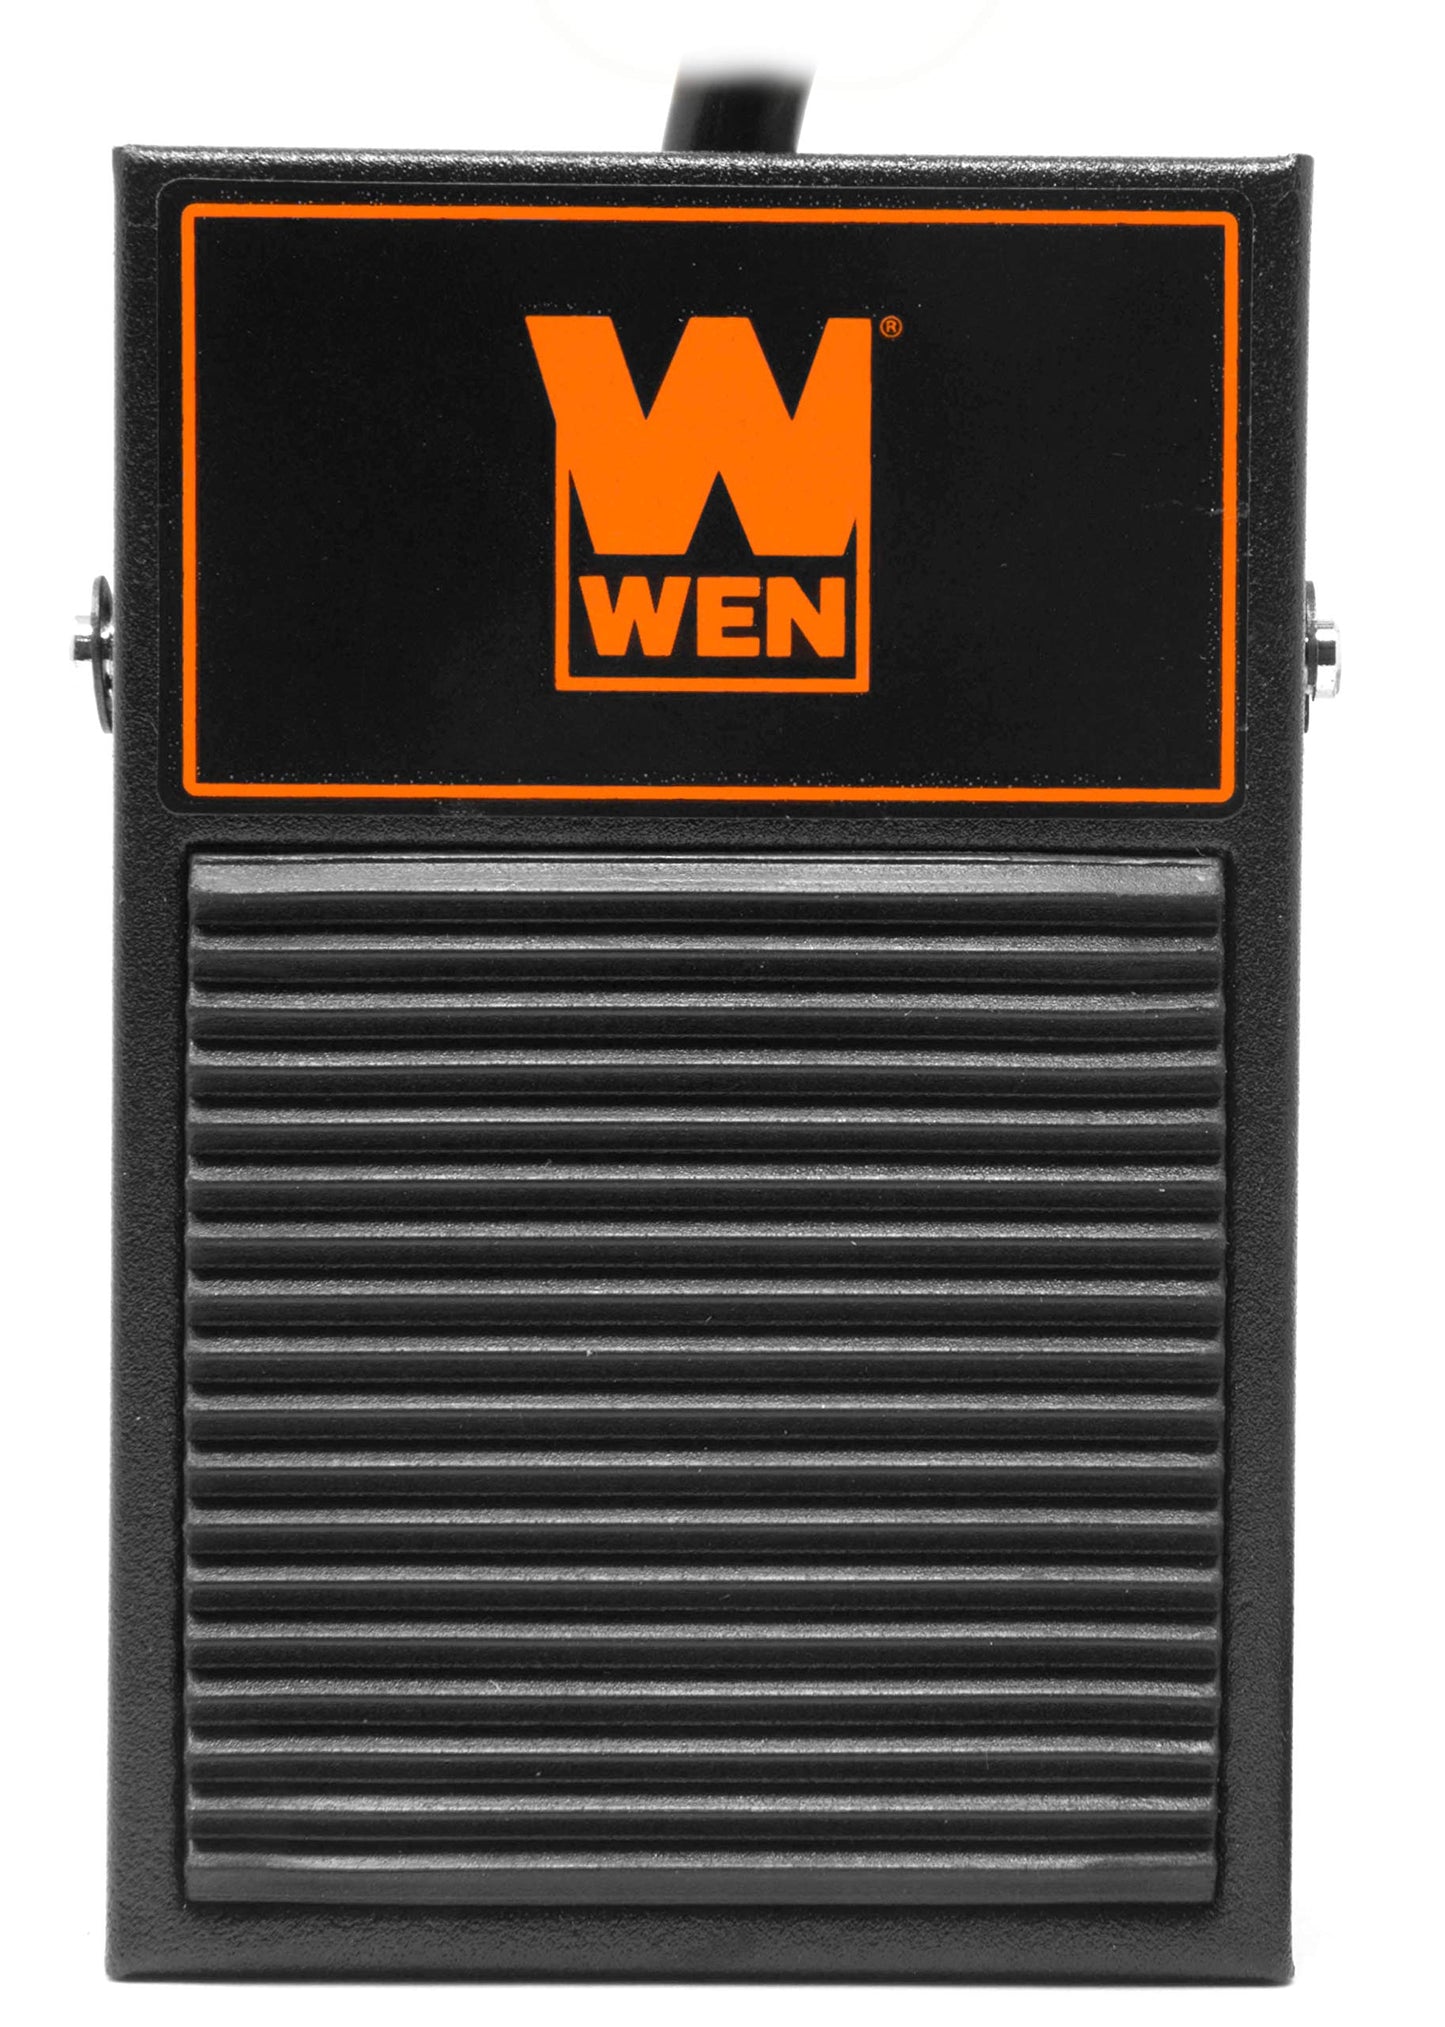 WEN 9-Inch Band Saw, 2.8-Amp Benchtop (BA3959) & WA0392 120V 15-Amp Momentary Power Foot Pedal Switch for Woodworking